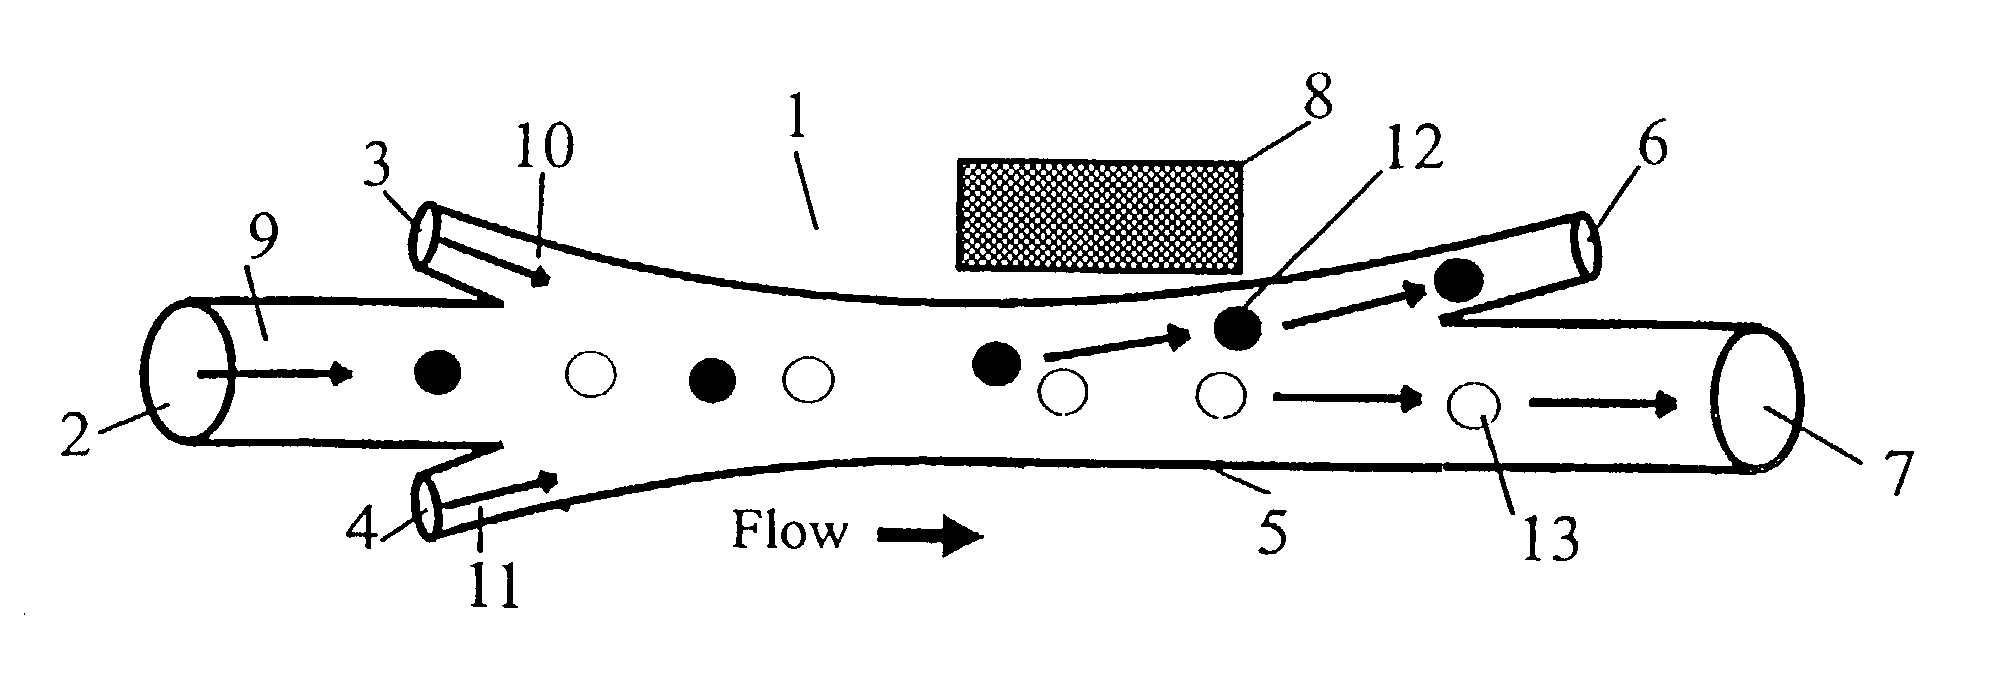 Microflow system for particle separation and analysis